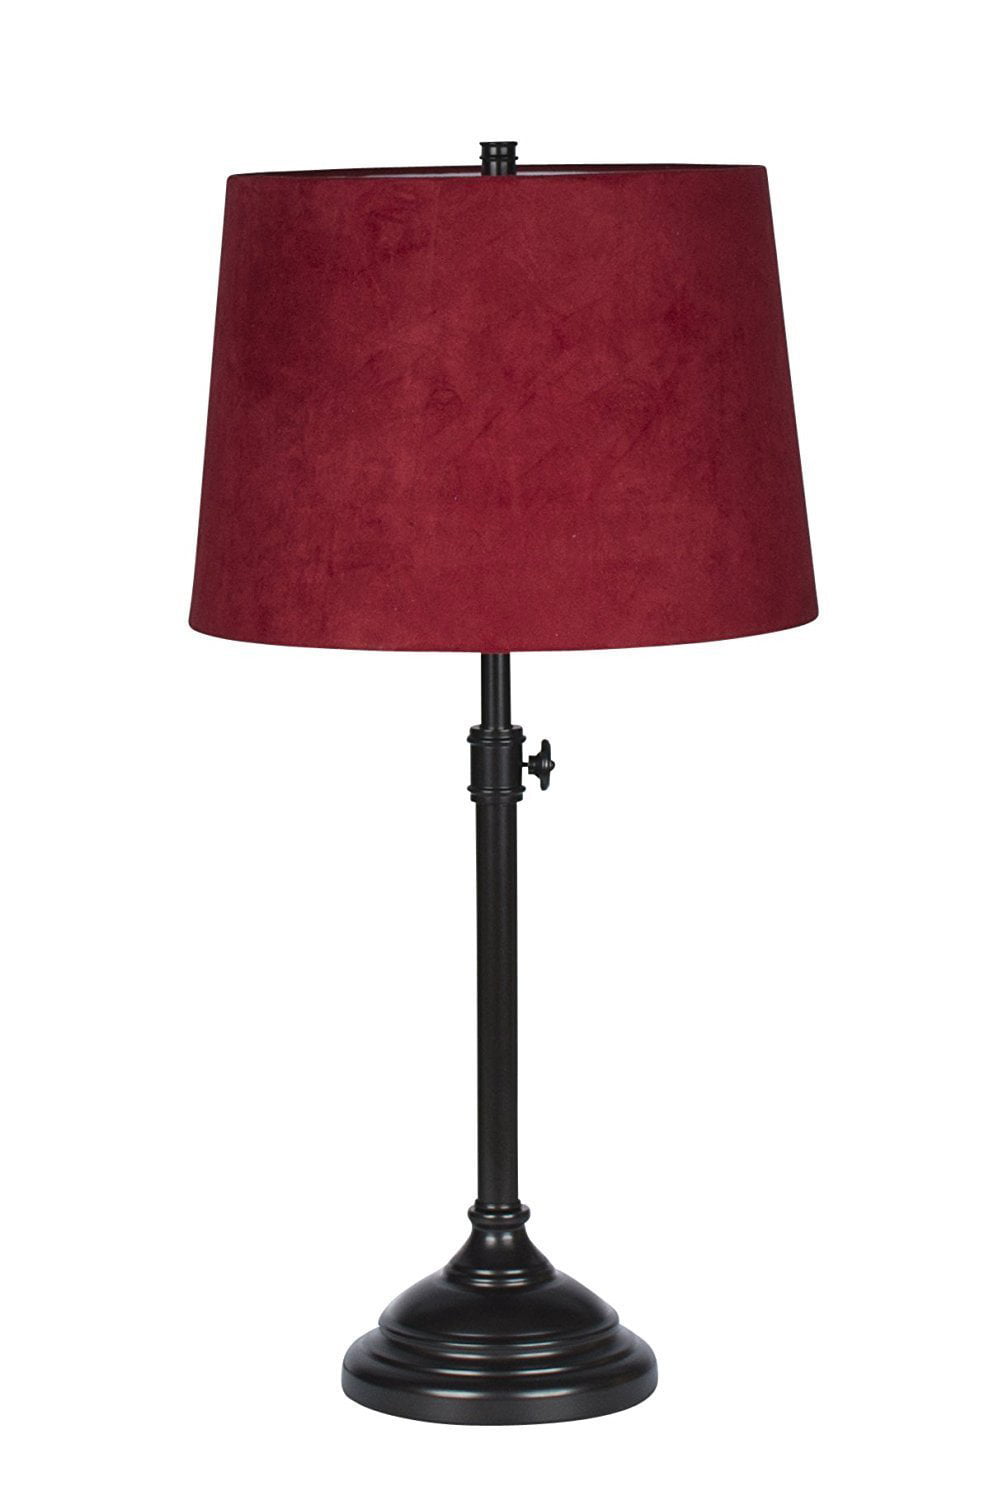 Urbanest Windsor Adjustable Accent Lamp, Oil Rubbed Bronze Table Lamp Base